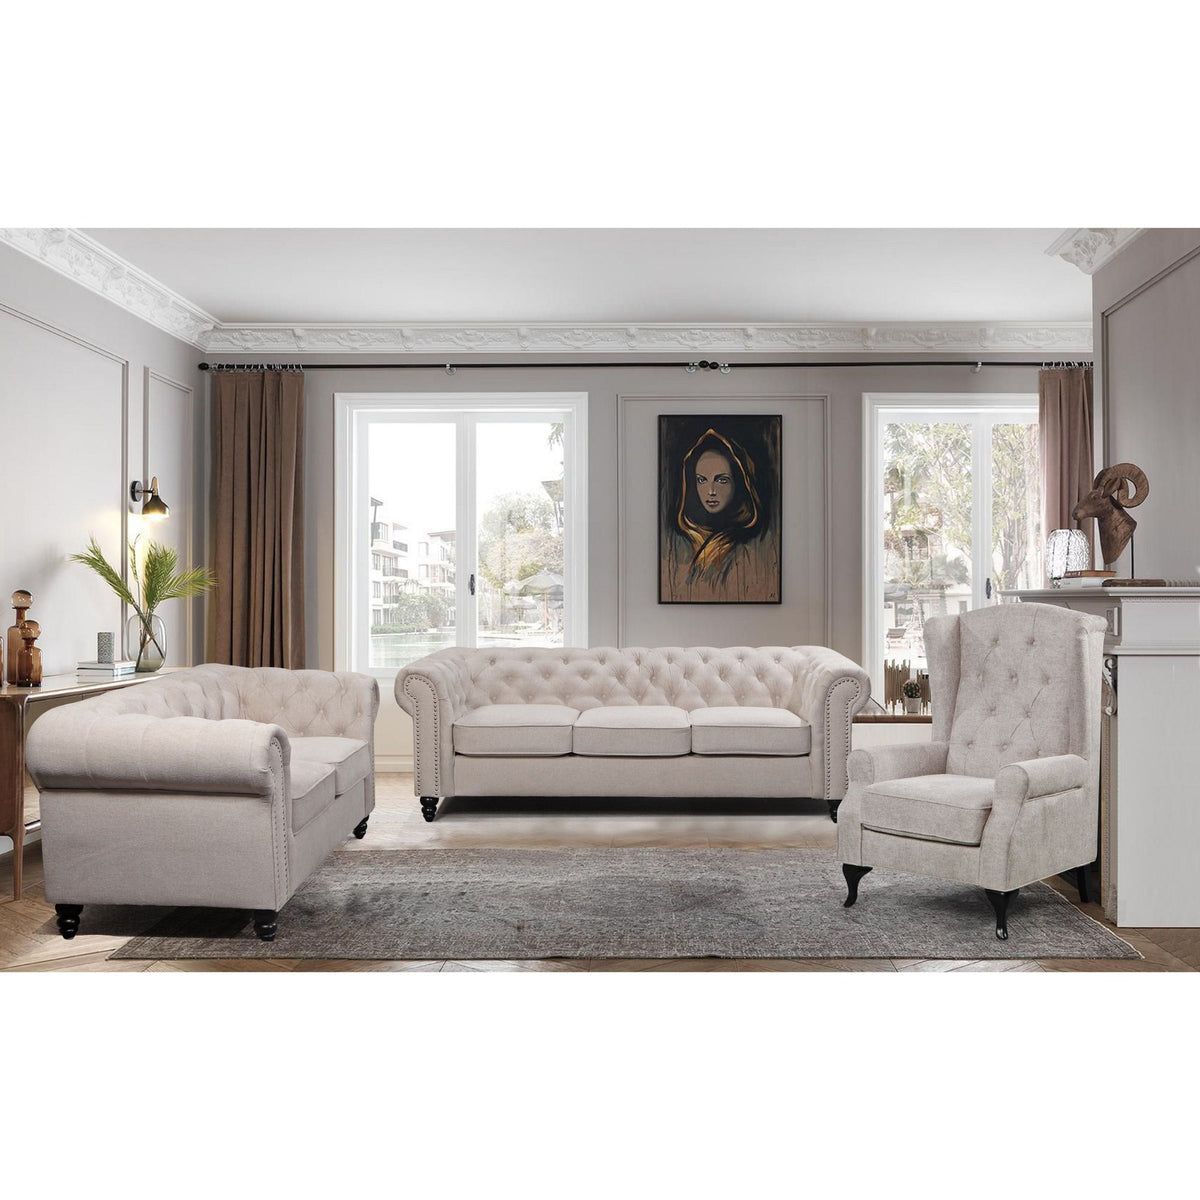 Kiho Chesterfield Wing Back Fabric Upholstered Sofa Chair - Beige - Notbrand